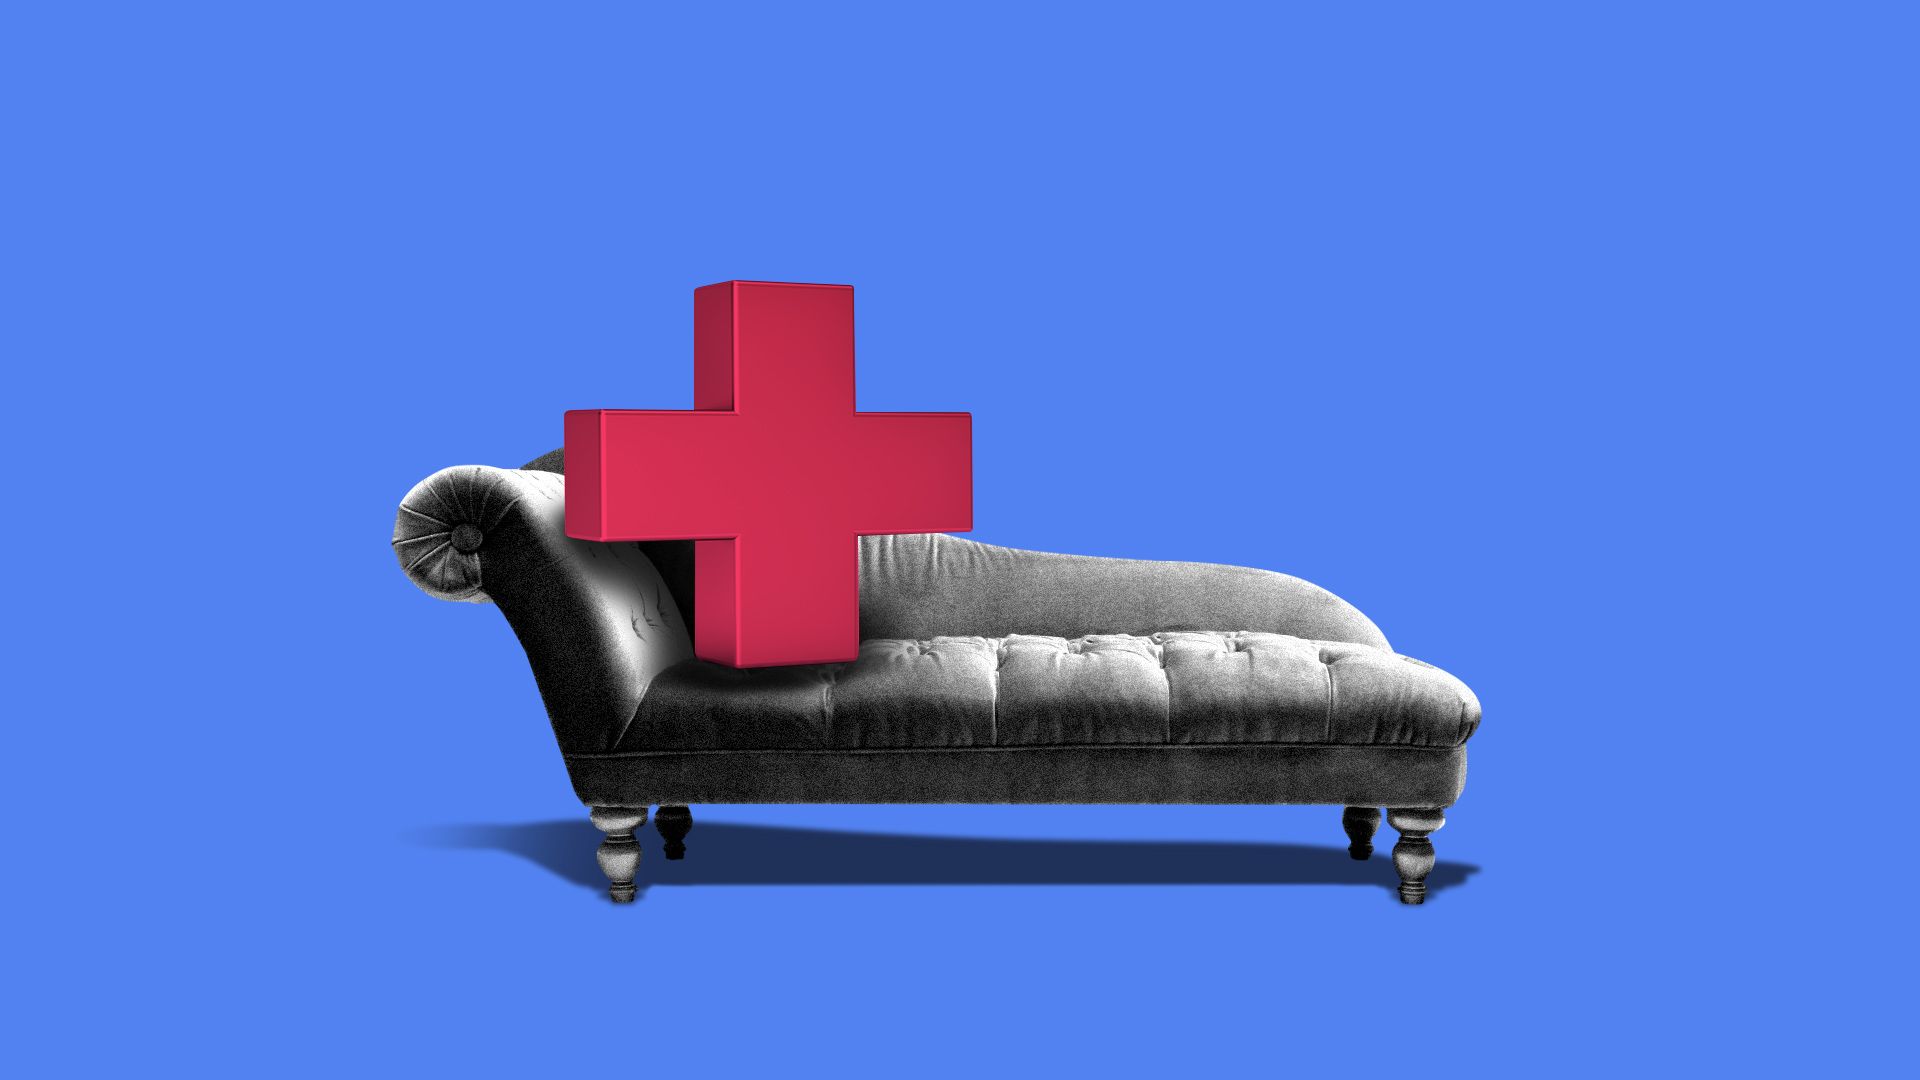 Illustration of a health plus on a therapist couch.